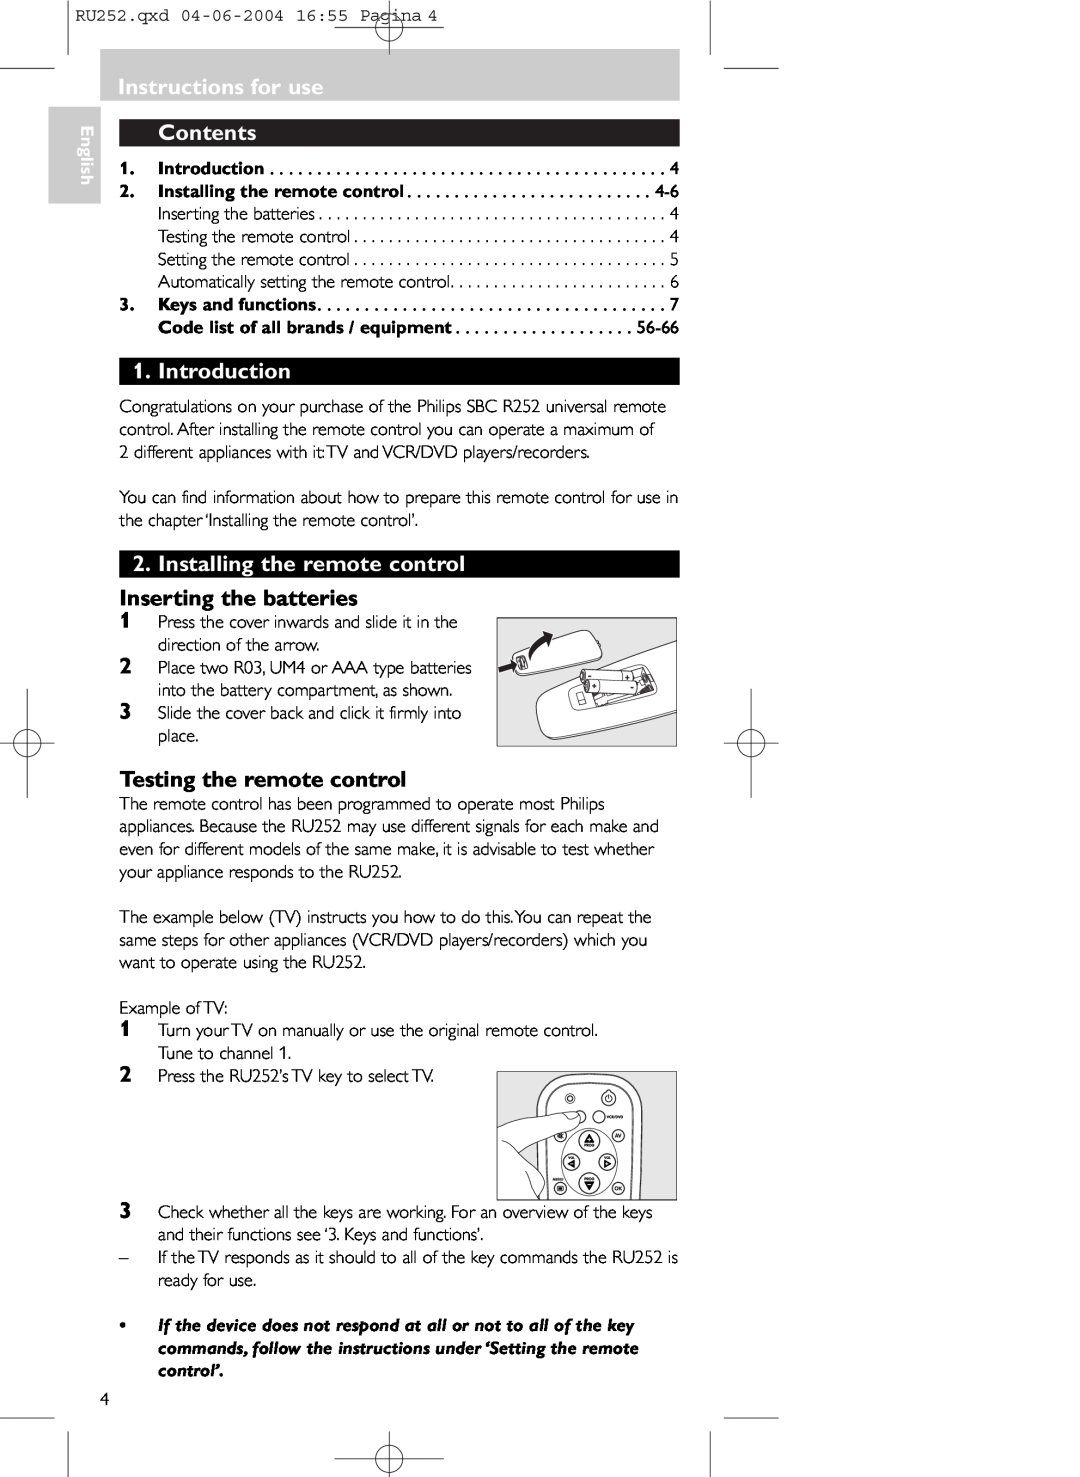 Philips SBC RU 252 Instructions for use Contents, Introduction, Installing the remote control, Inserting the batteries 